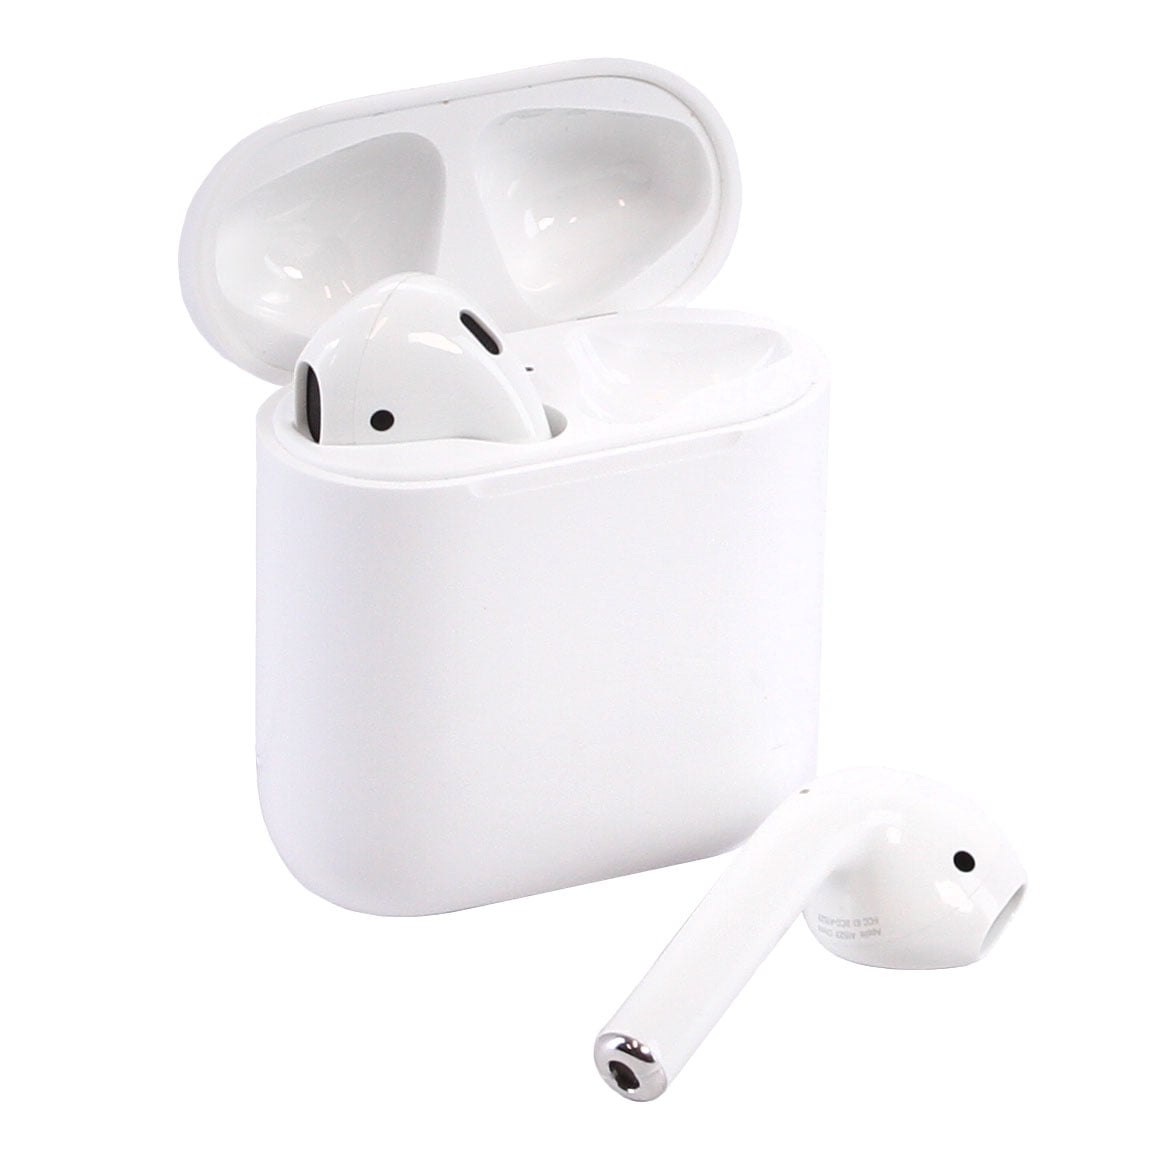 Apple AirPods with Charging Case (2nd Gen) - Refurbished - Walmart.com